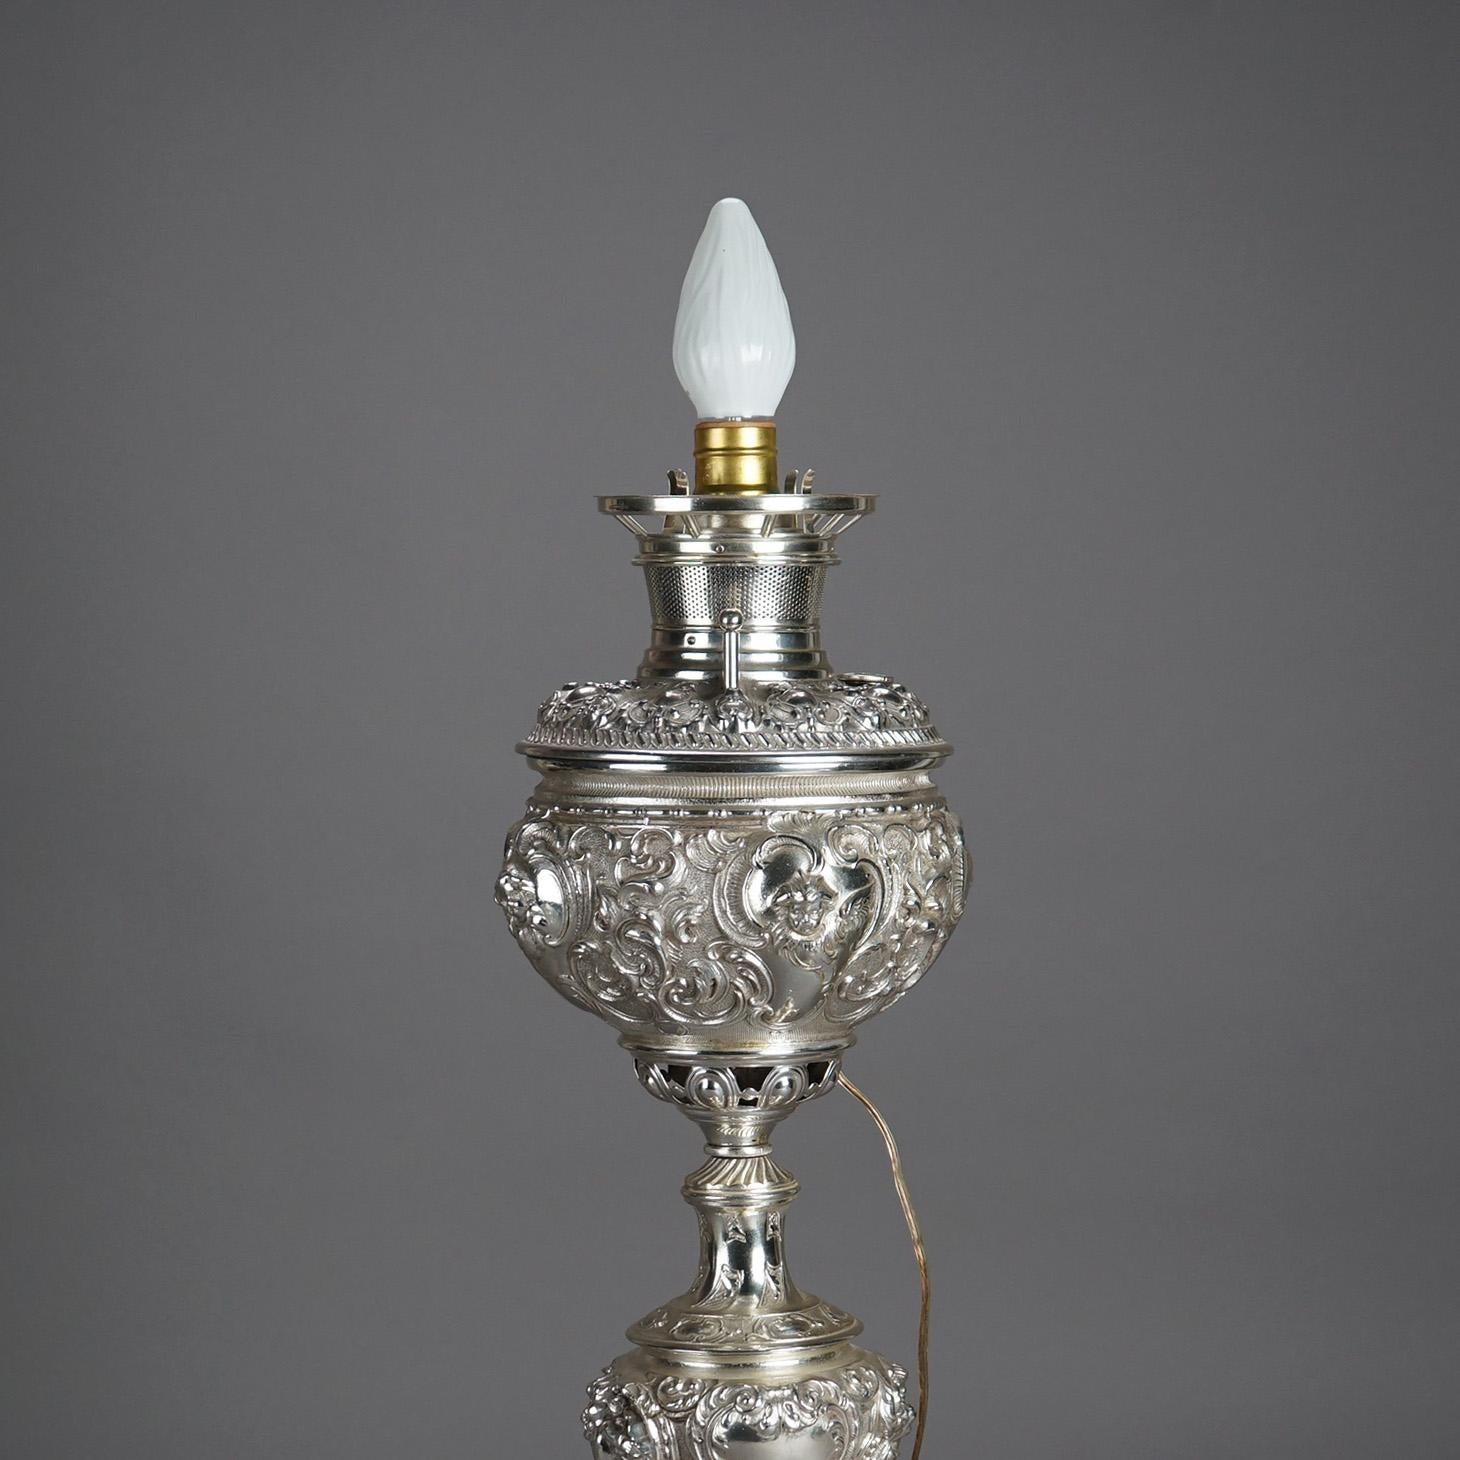 Antique Rococo Figural Silver Plate Parlor Lamp With Winged Cherubs c1890 For Sale 5